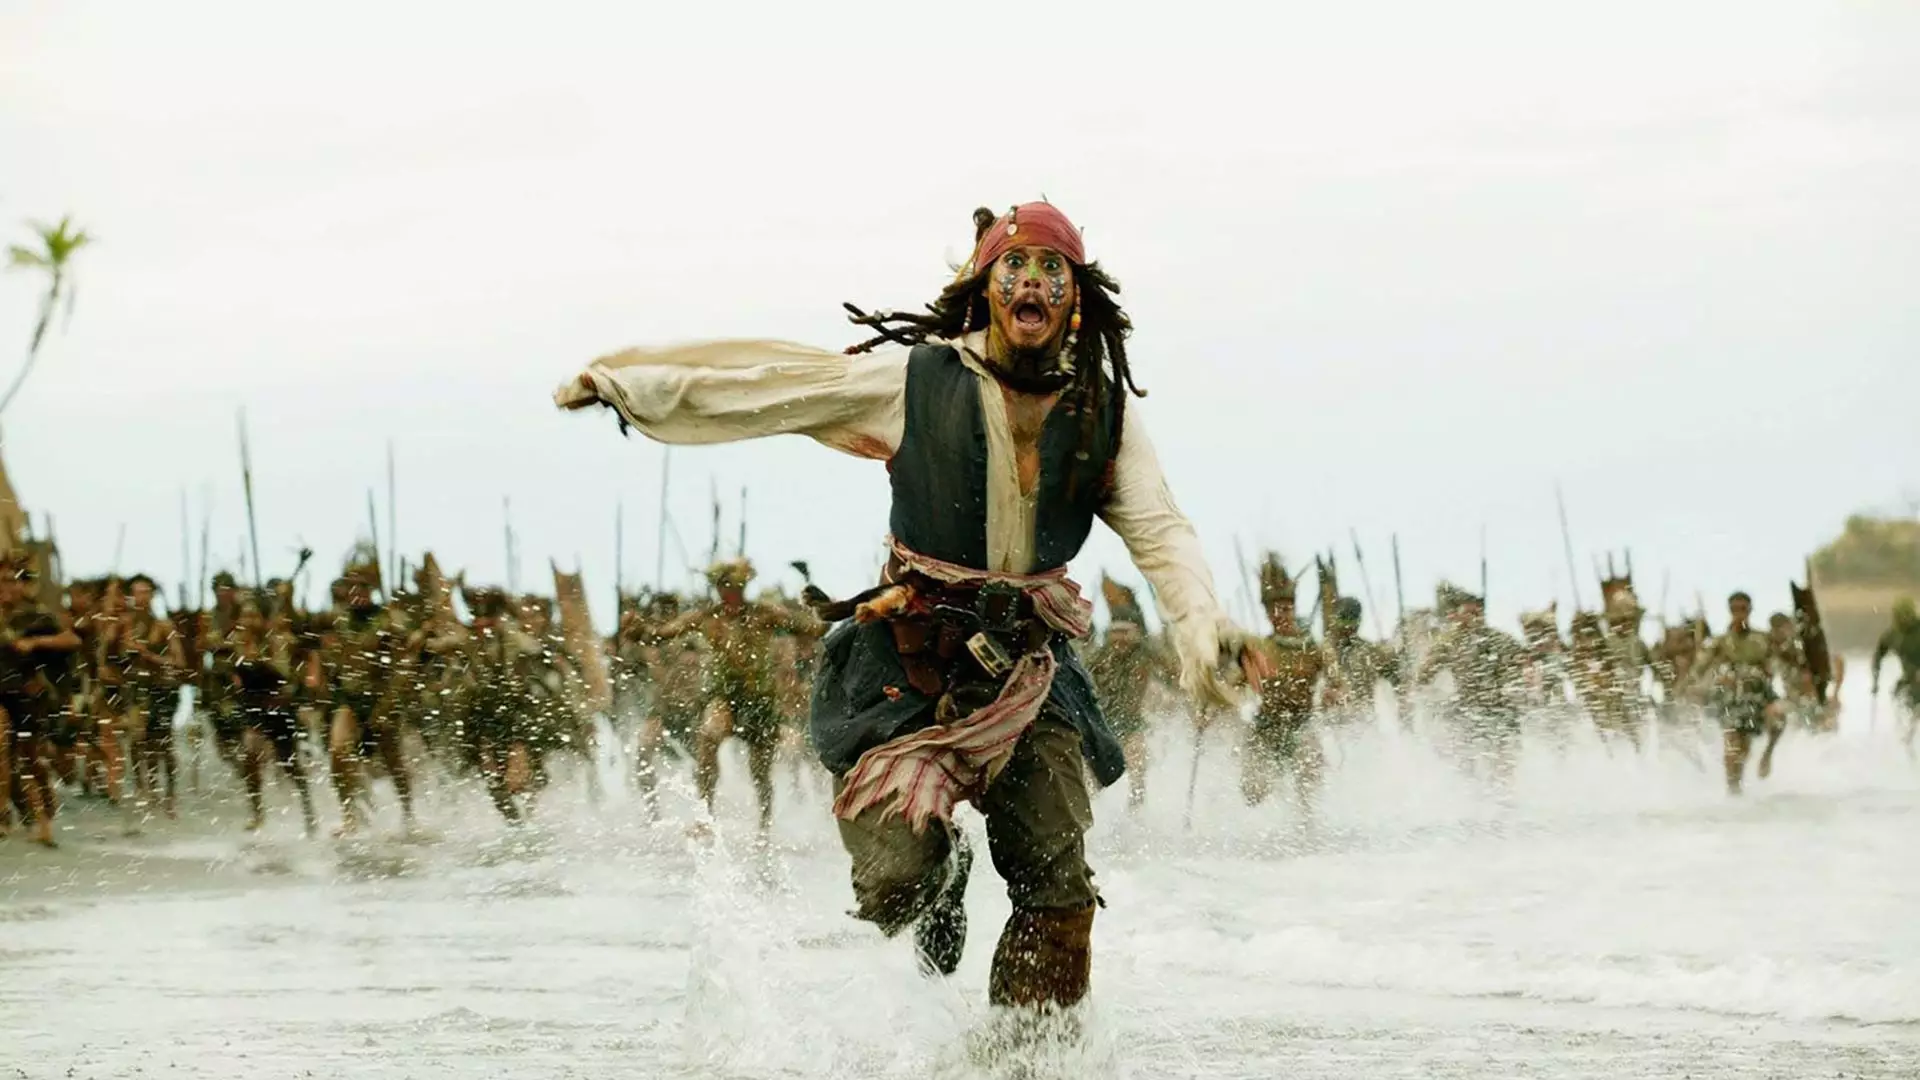 Pirates Of The Caribbean /